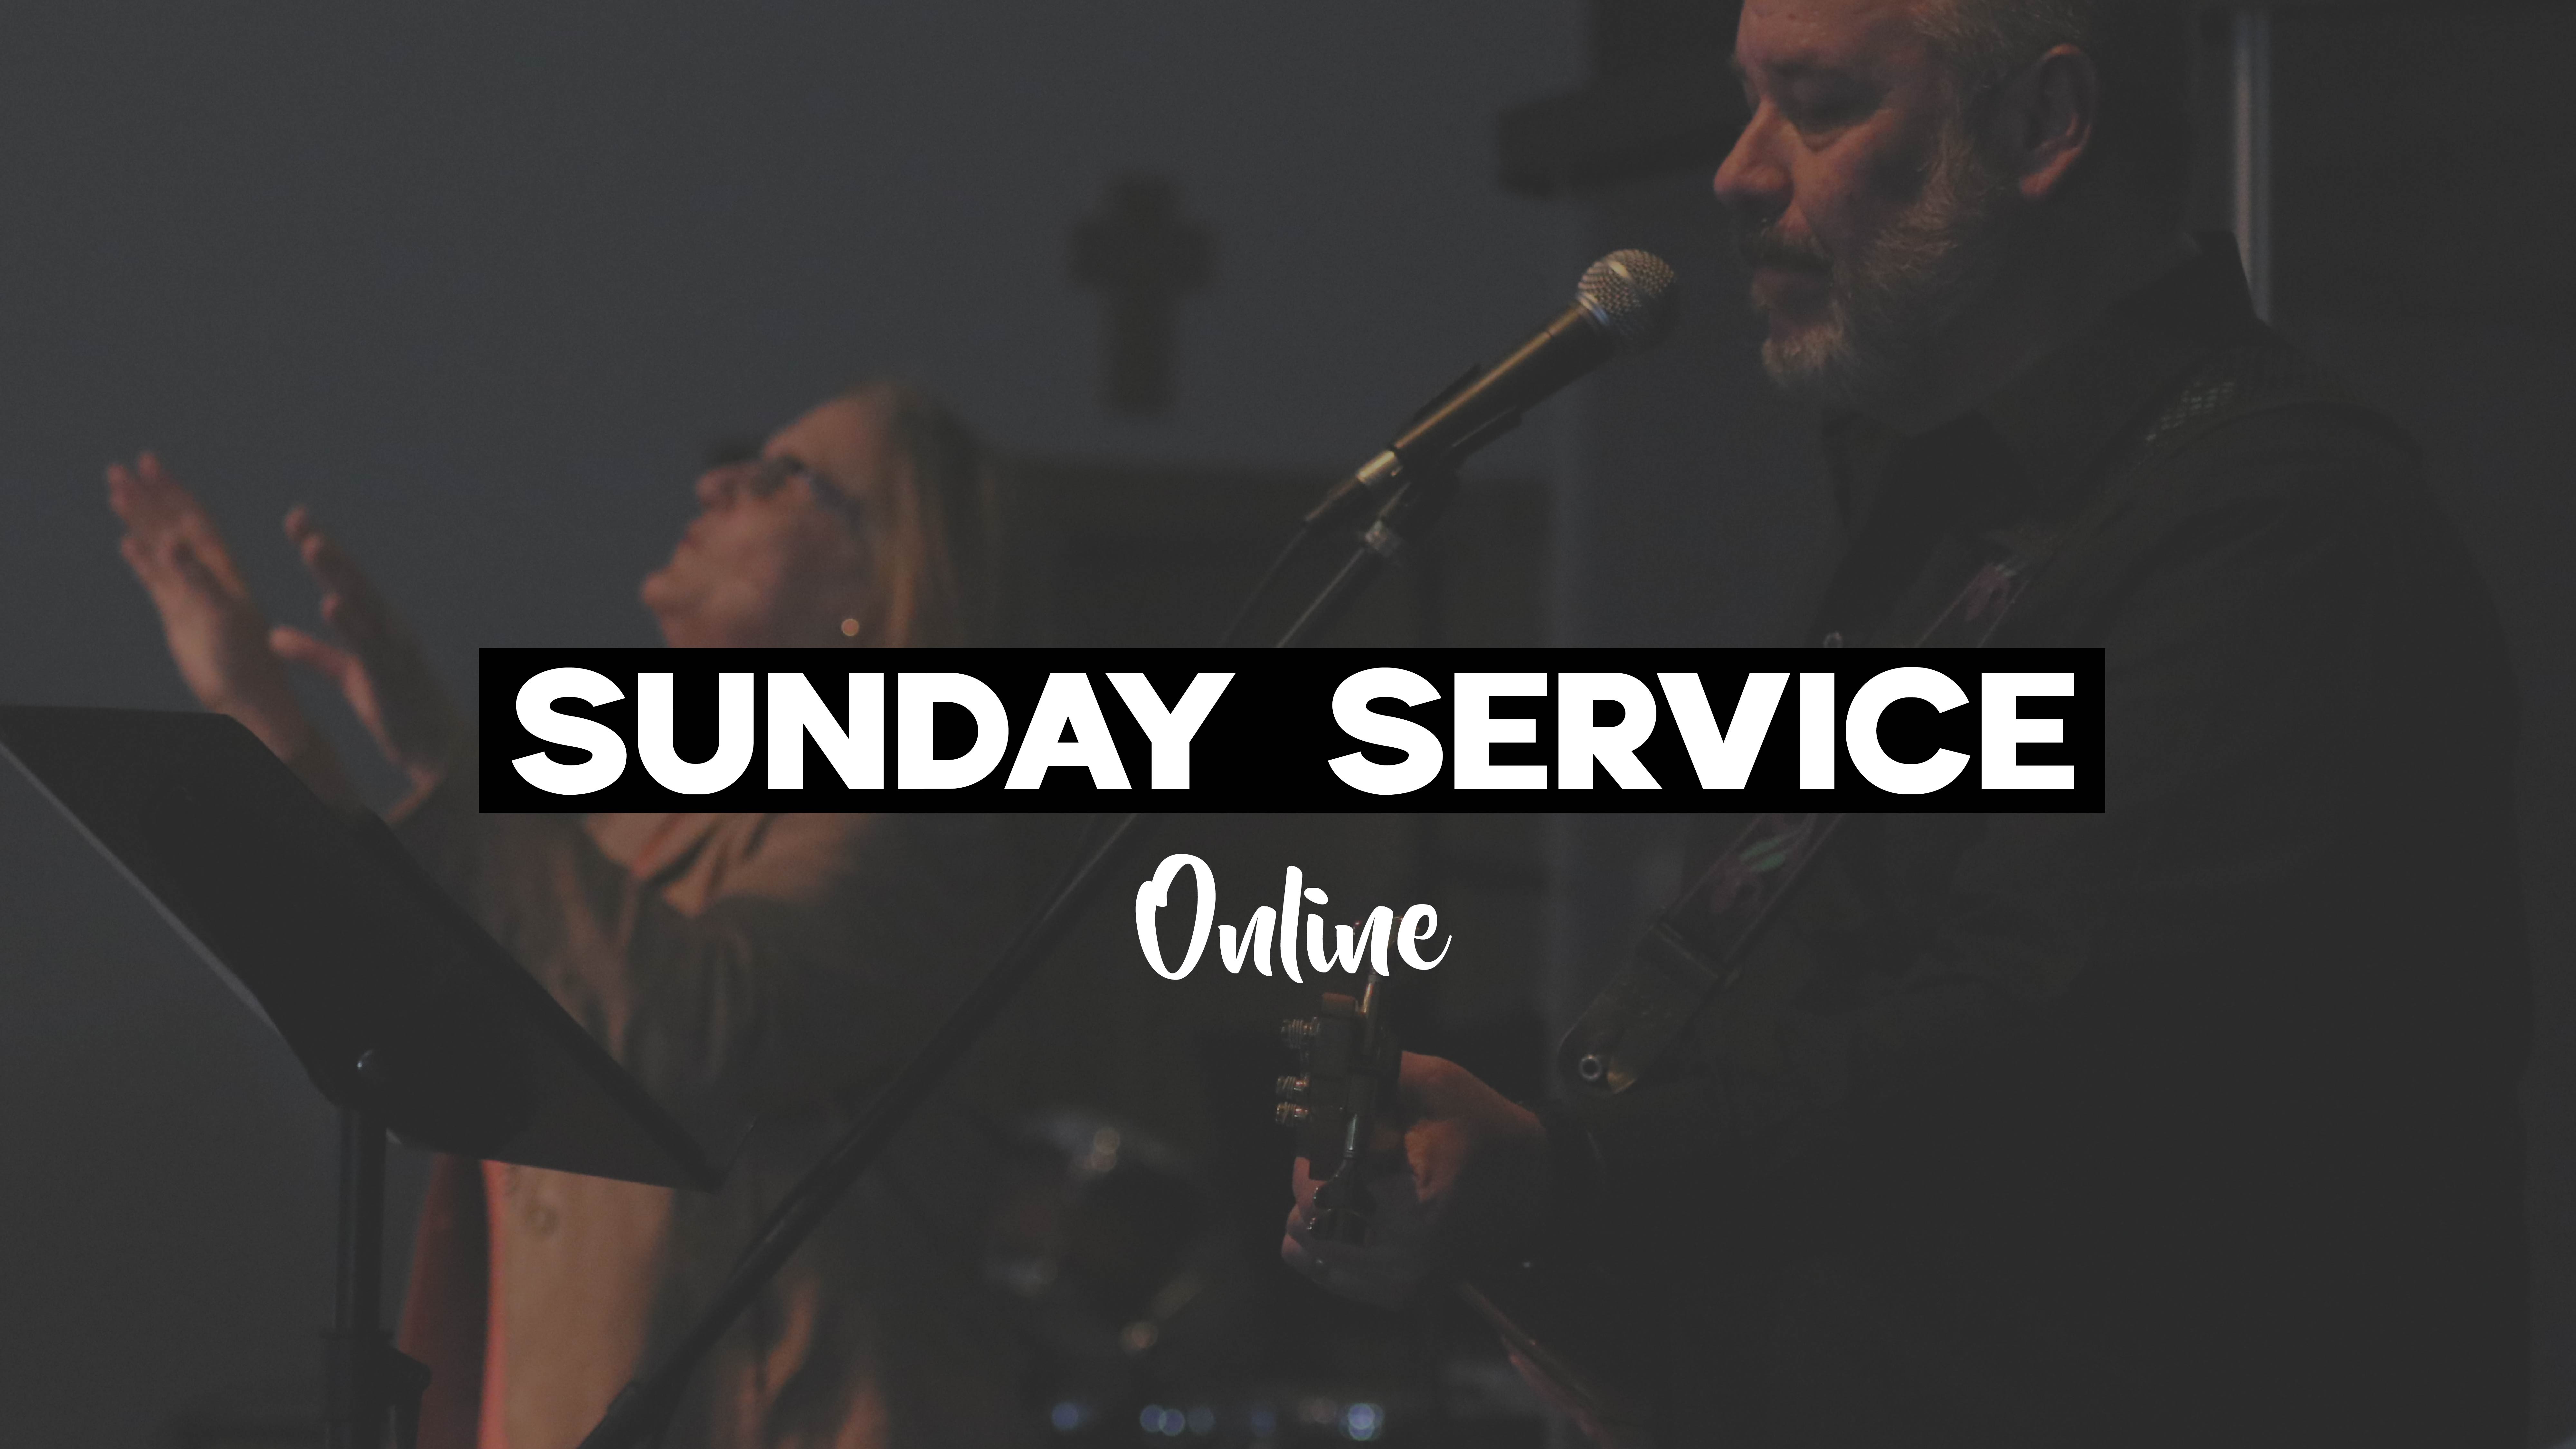 March 29th Online Service